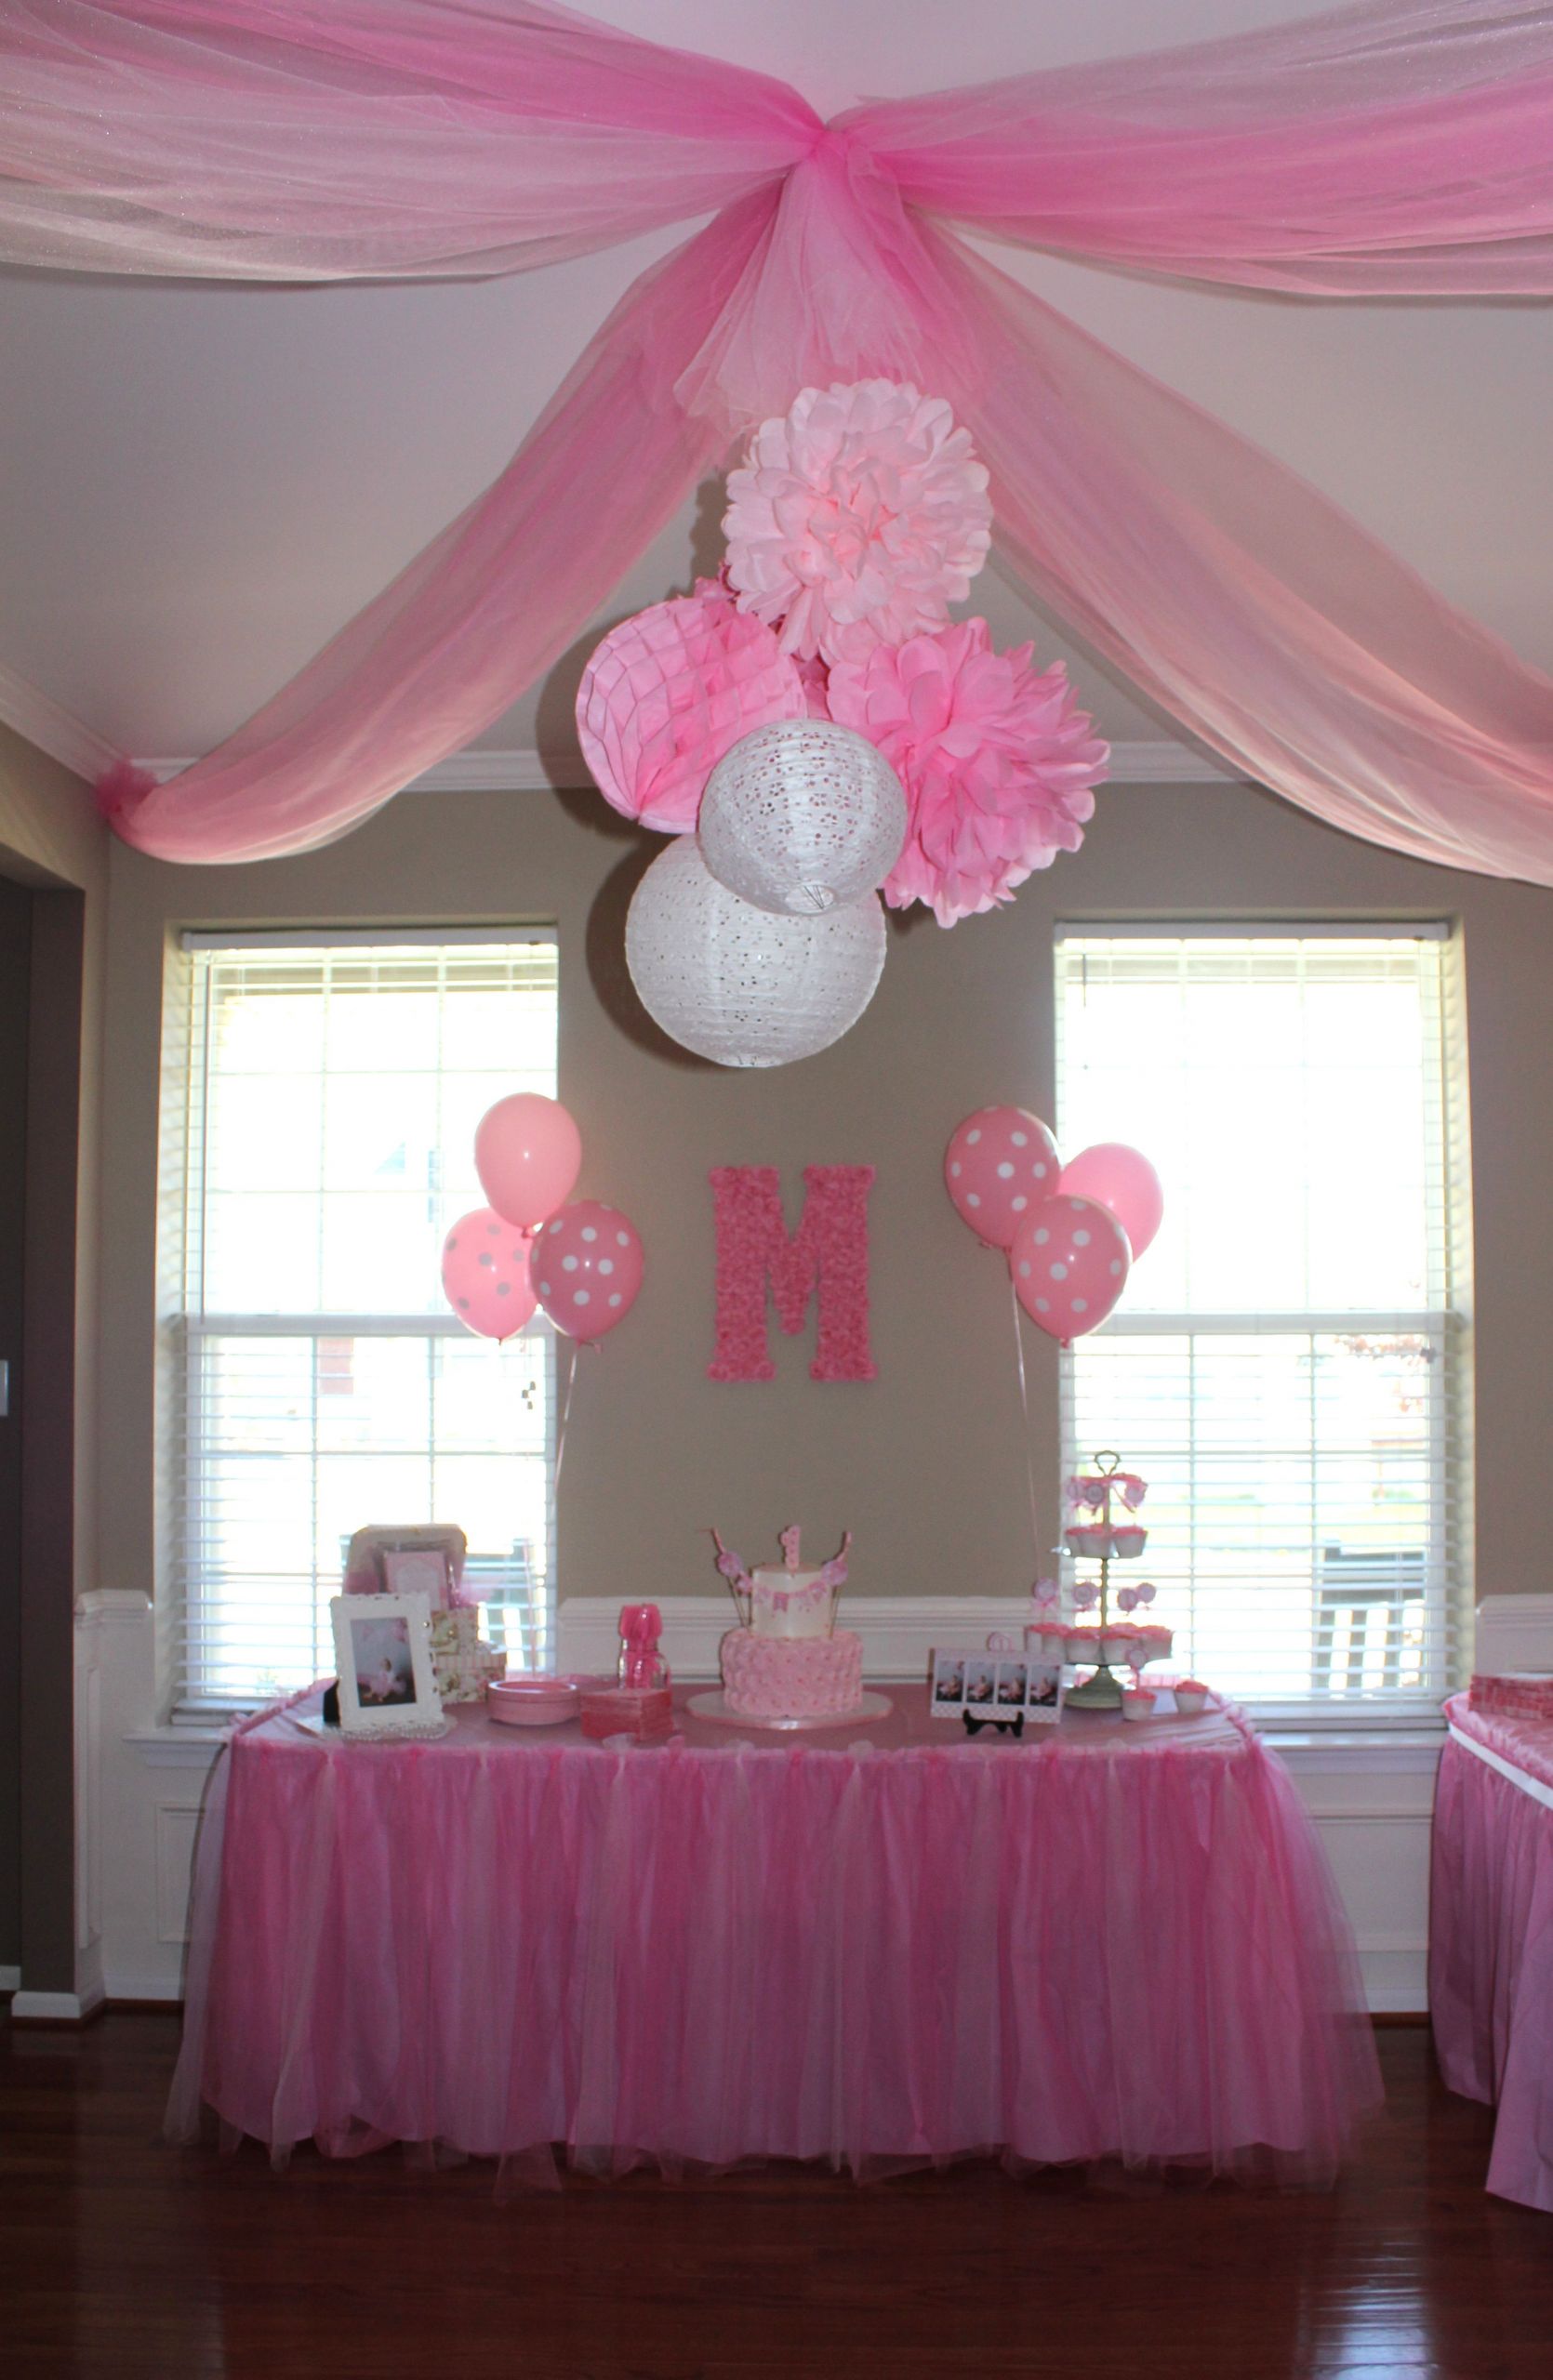 Decoration Ideas For Birthday Party
 PINK PARTY 3 tissue paper pom poms 3 paper lanterns